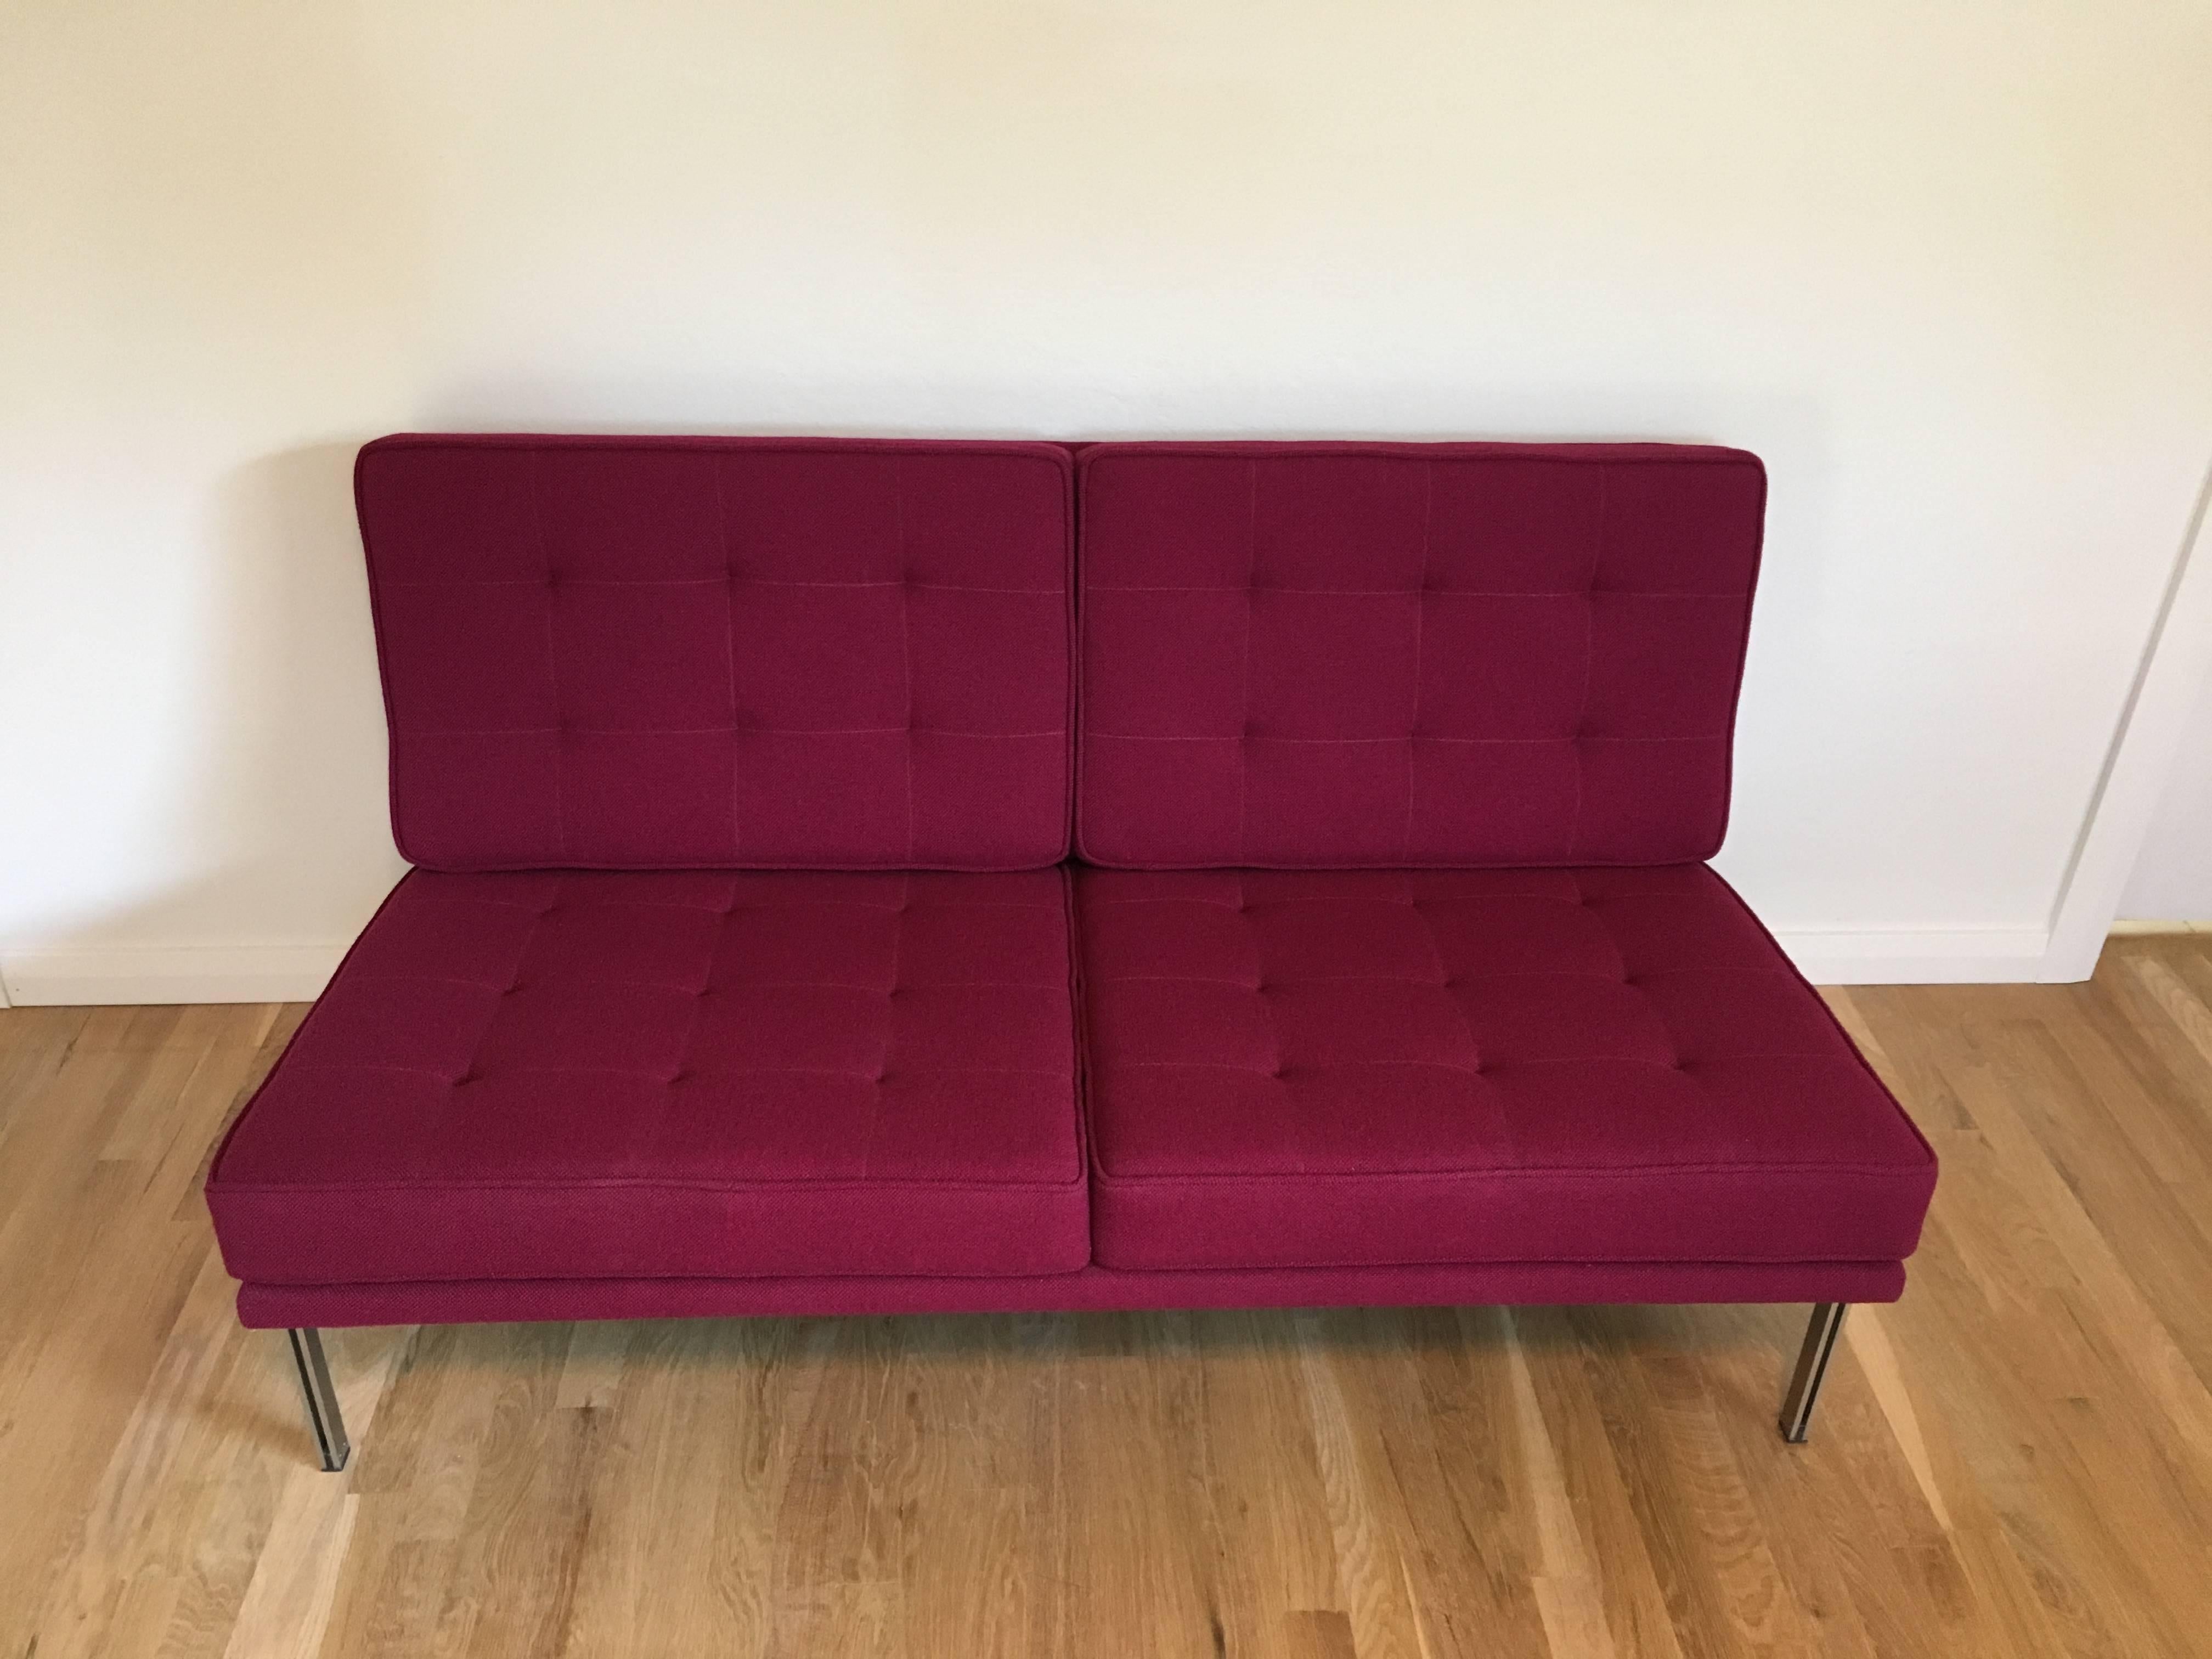 Florence Knoll Parallel Bar Settee Sofa In Excellent Condition For Sale In Salt Lake City, UT